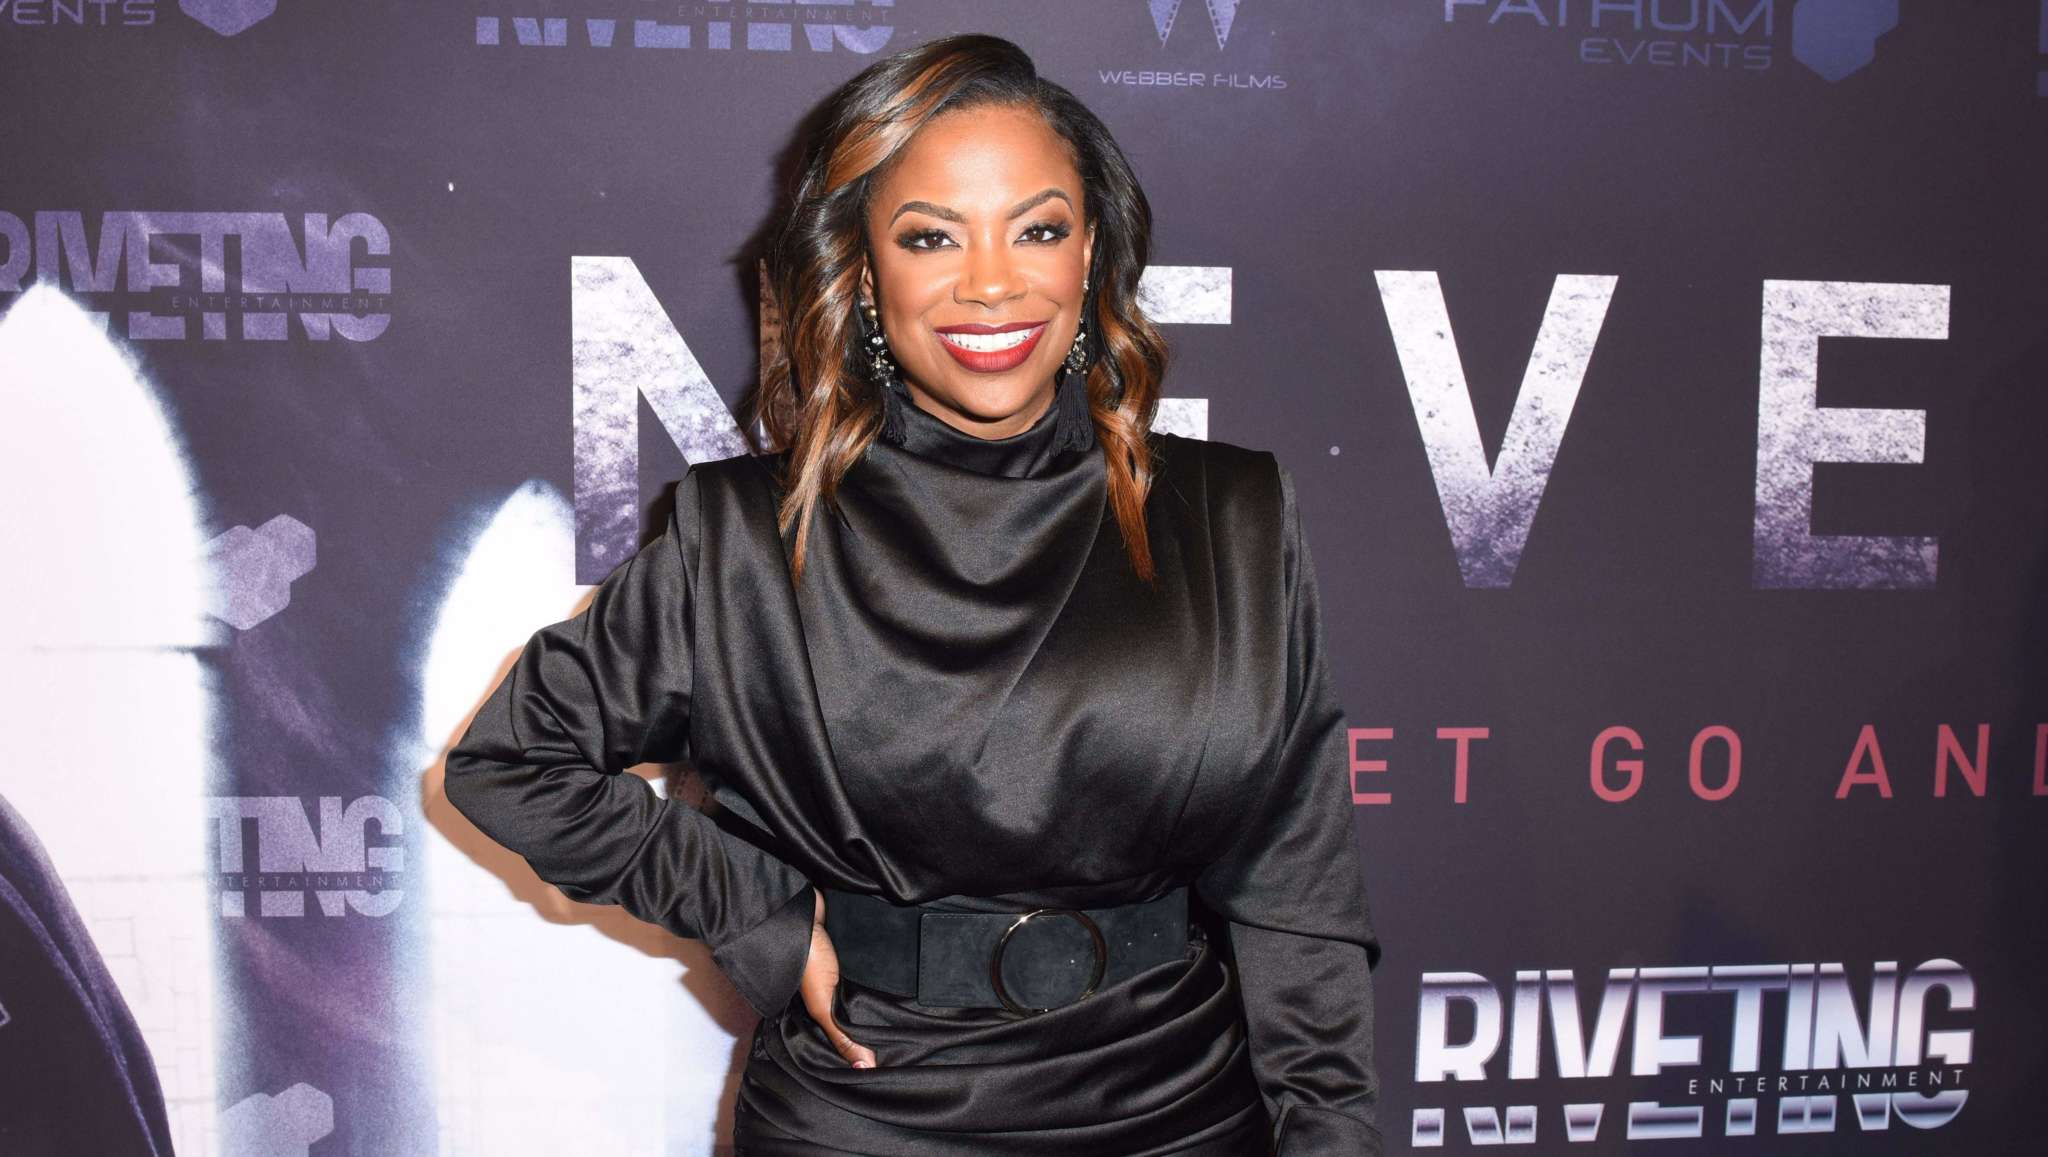 Kandi Burruss Gives Fans The Gift Of A Business - See Her Video